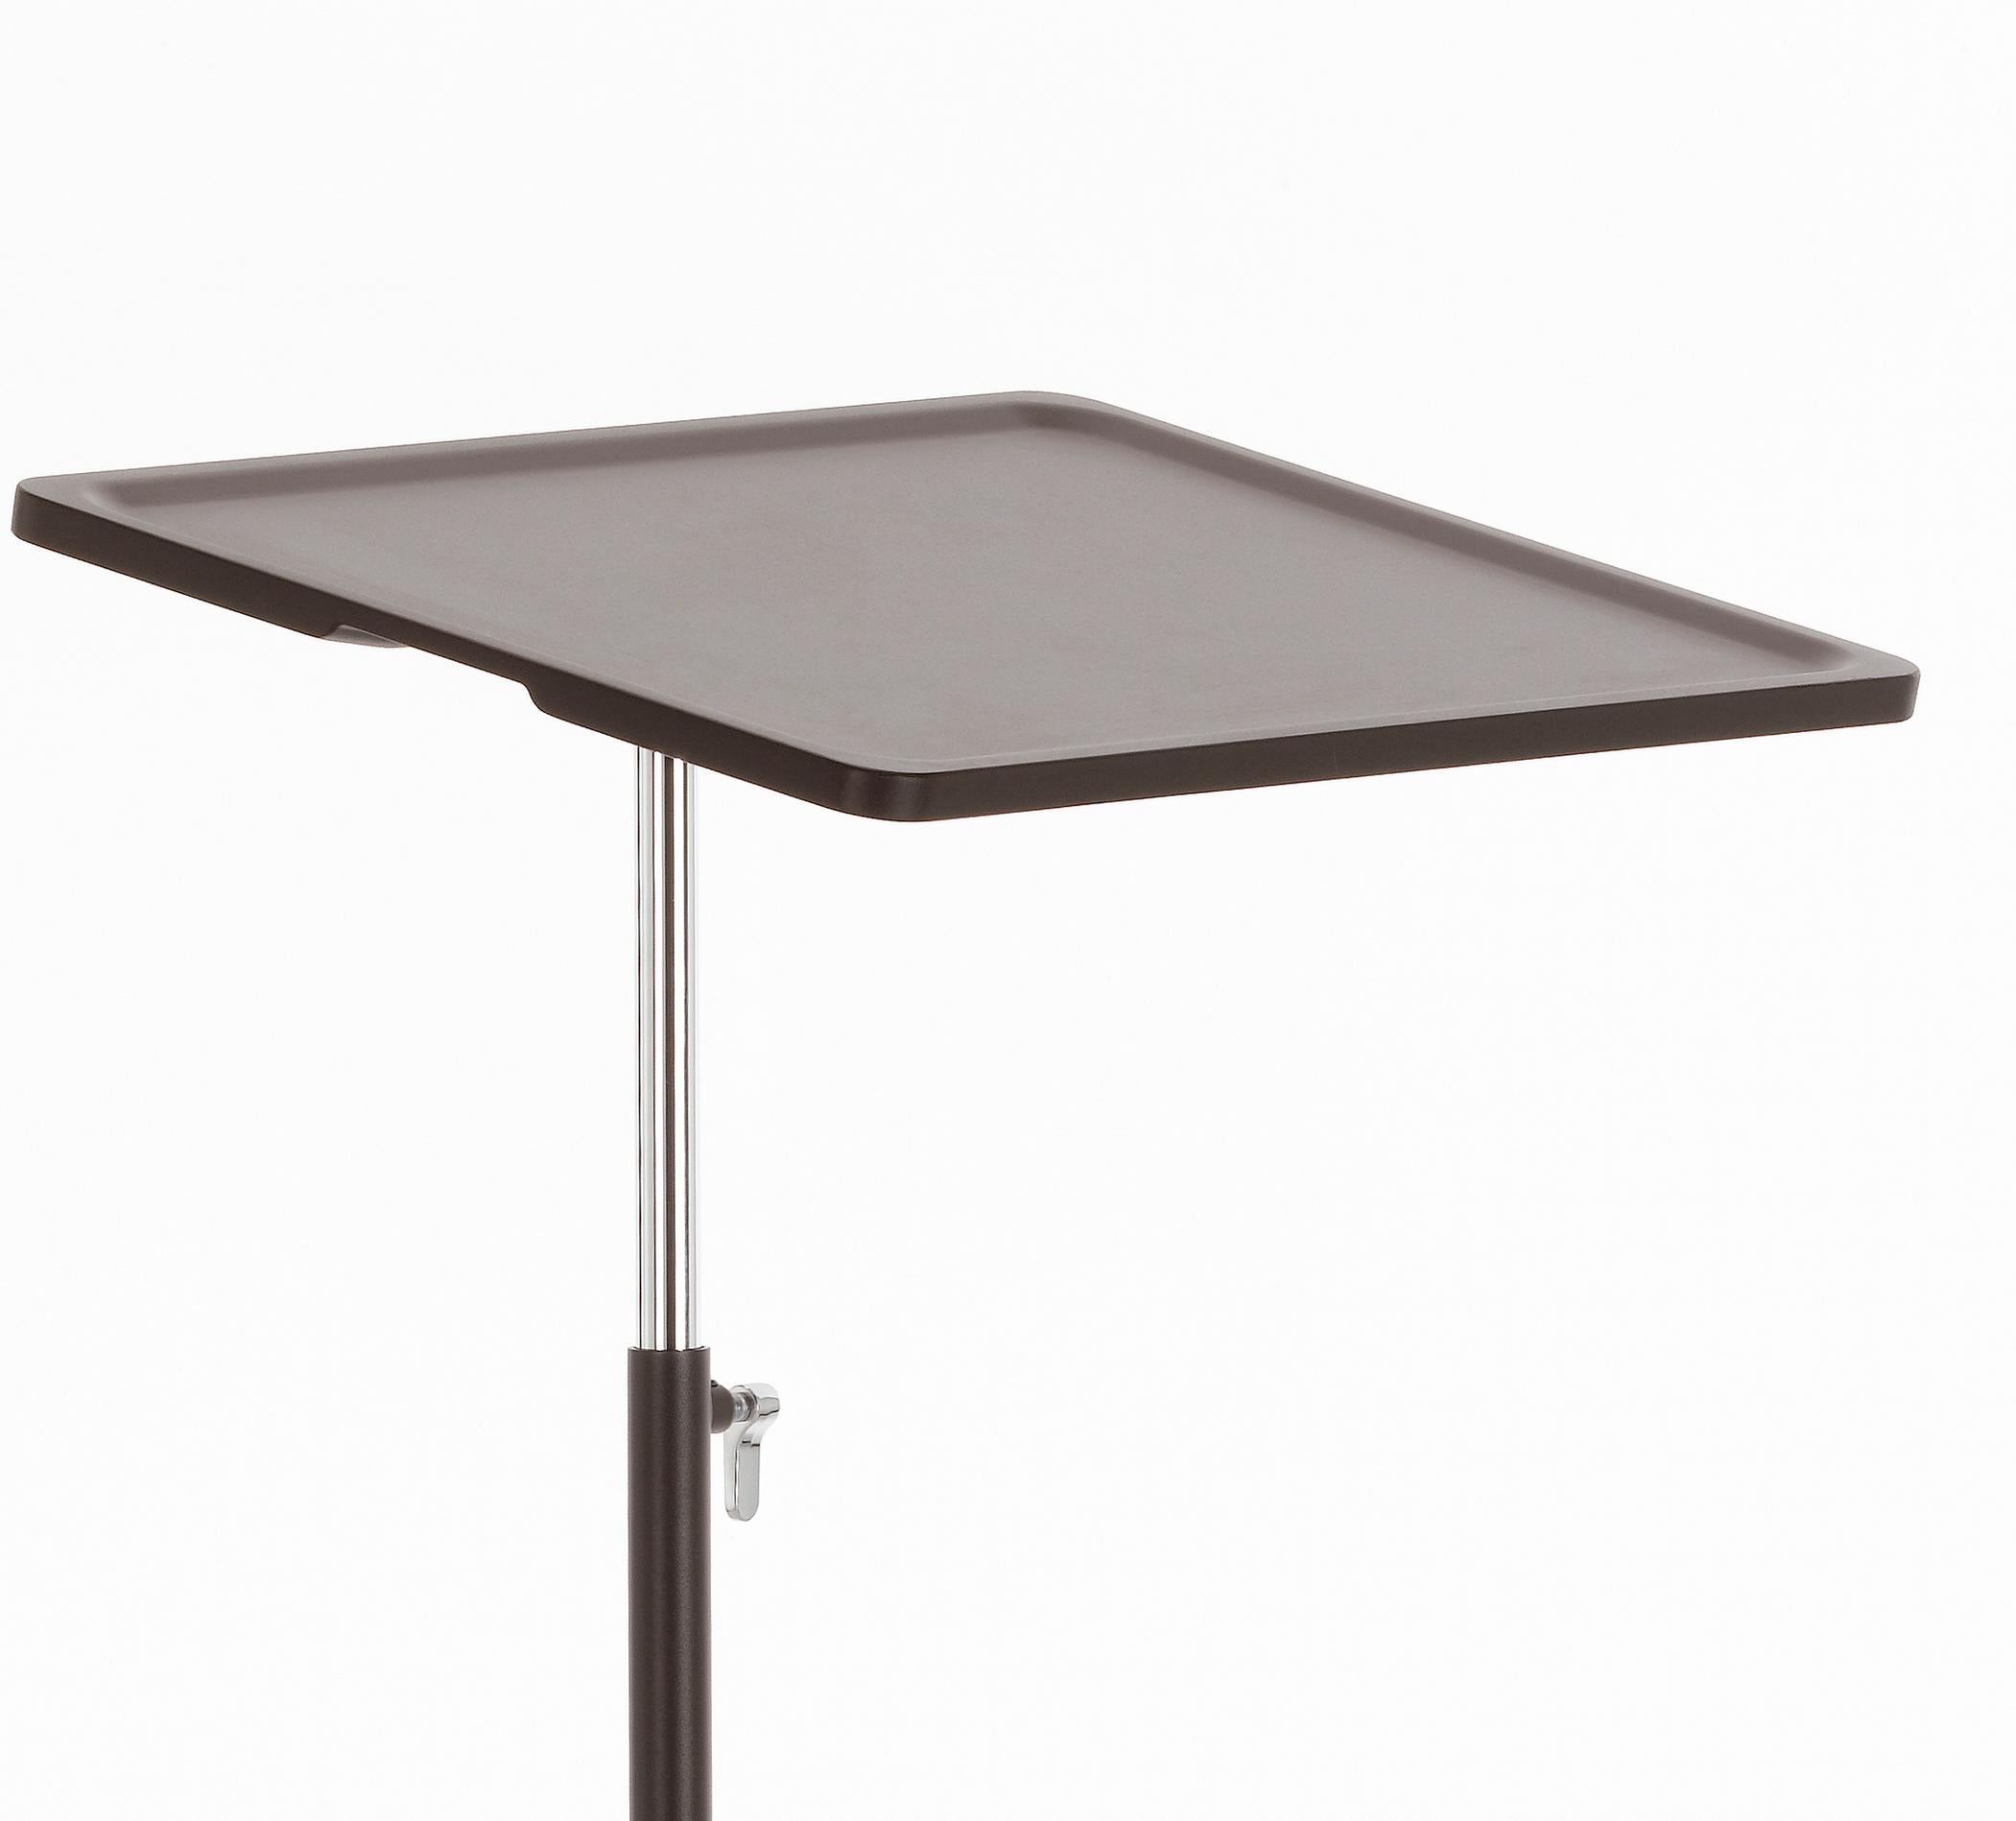 These products are only available in the United States.

 NesTable offers a lightweight and flexible solution. The tray platform is fully adjustable in height and angle, which makes it possible to maintain a correct ergonomic working posture, even